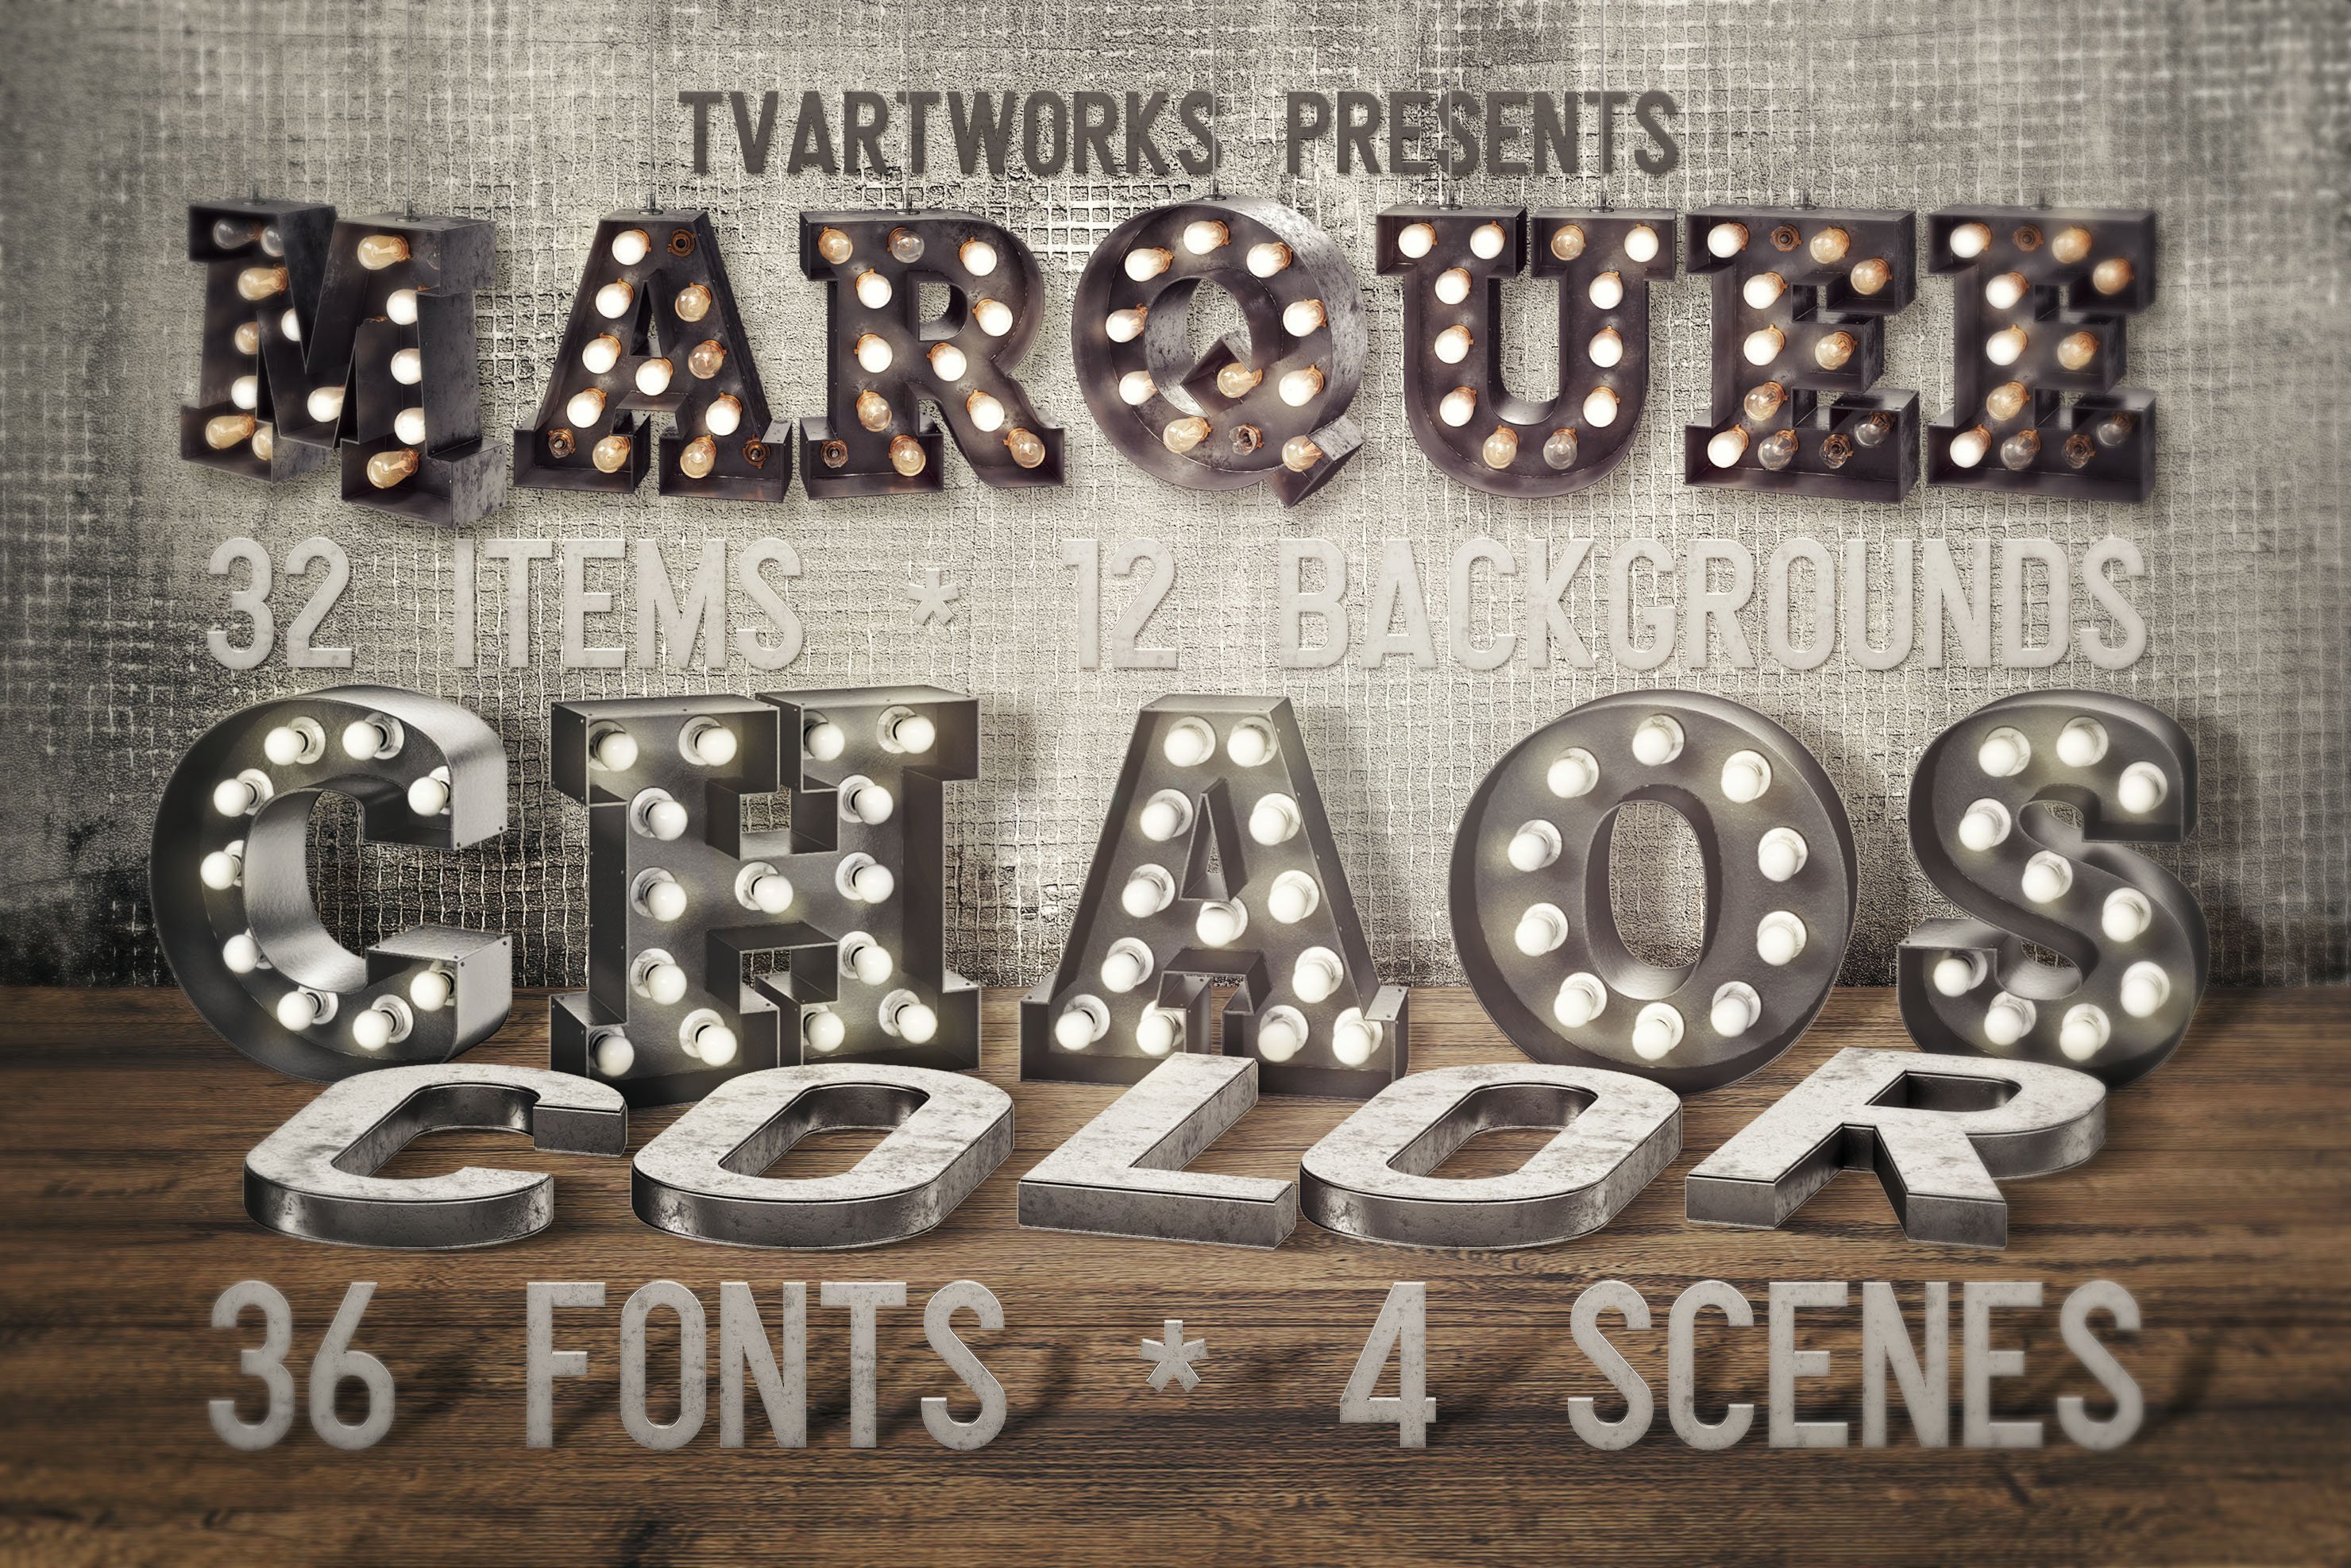 Marquee Chaos View - Color Fonts